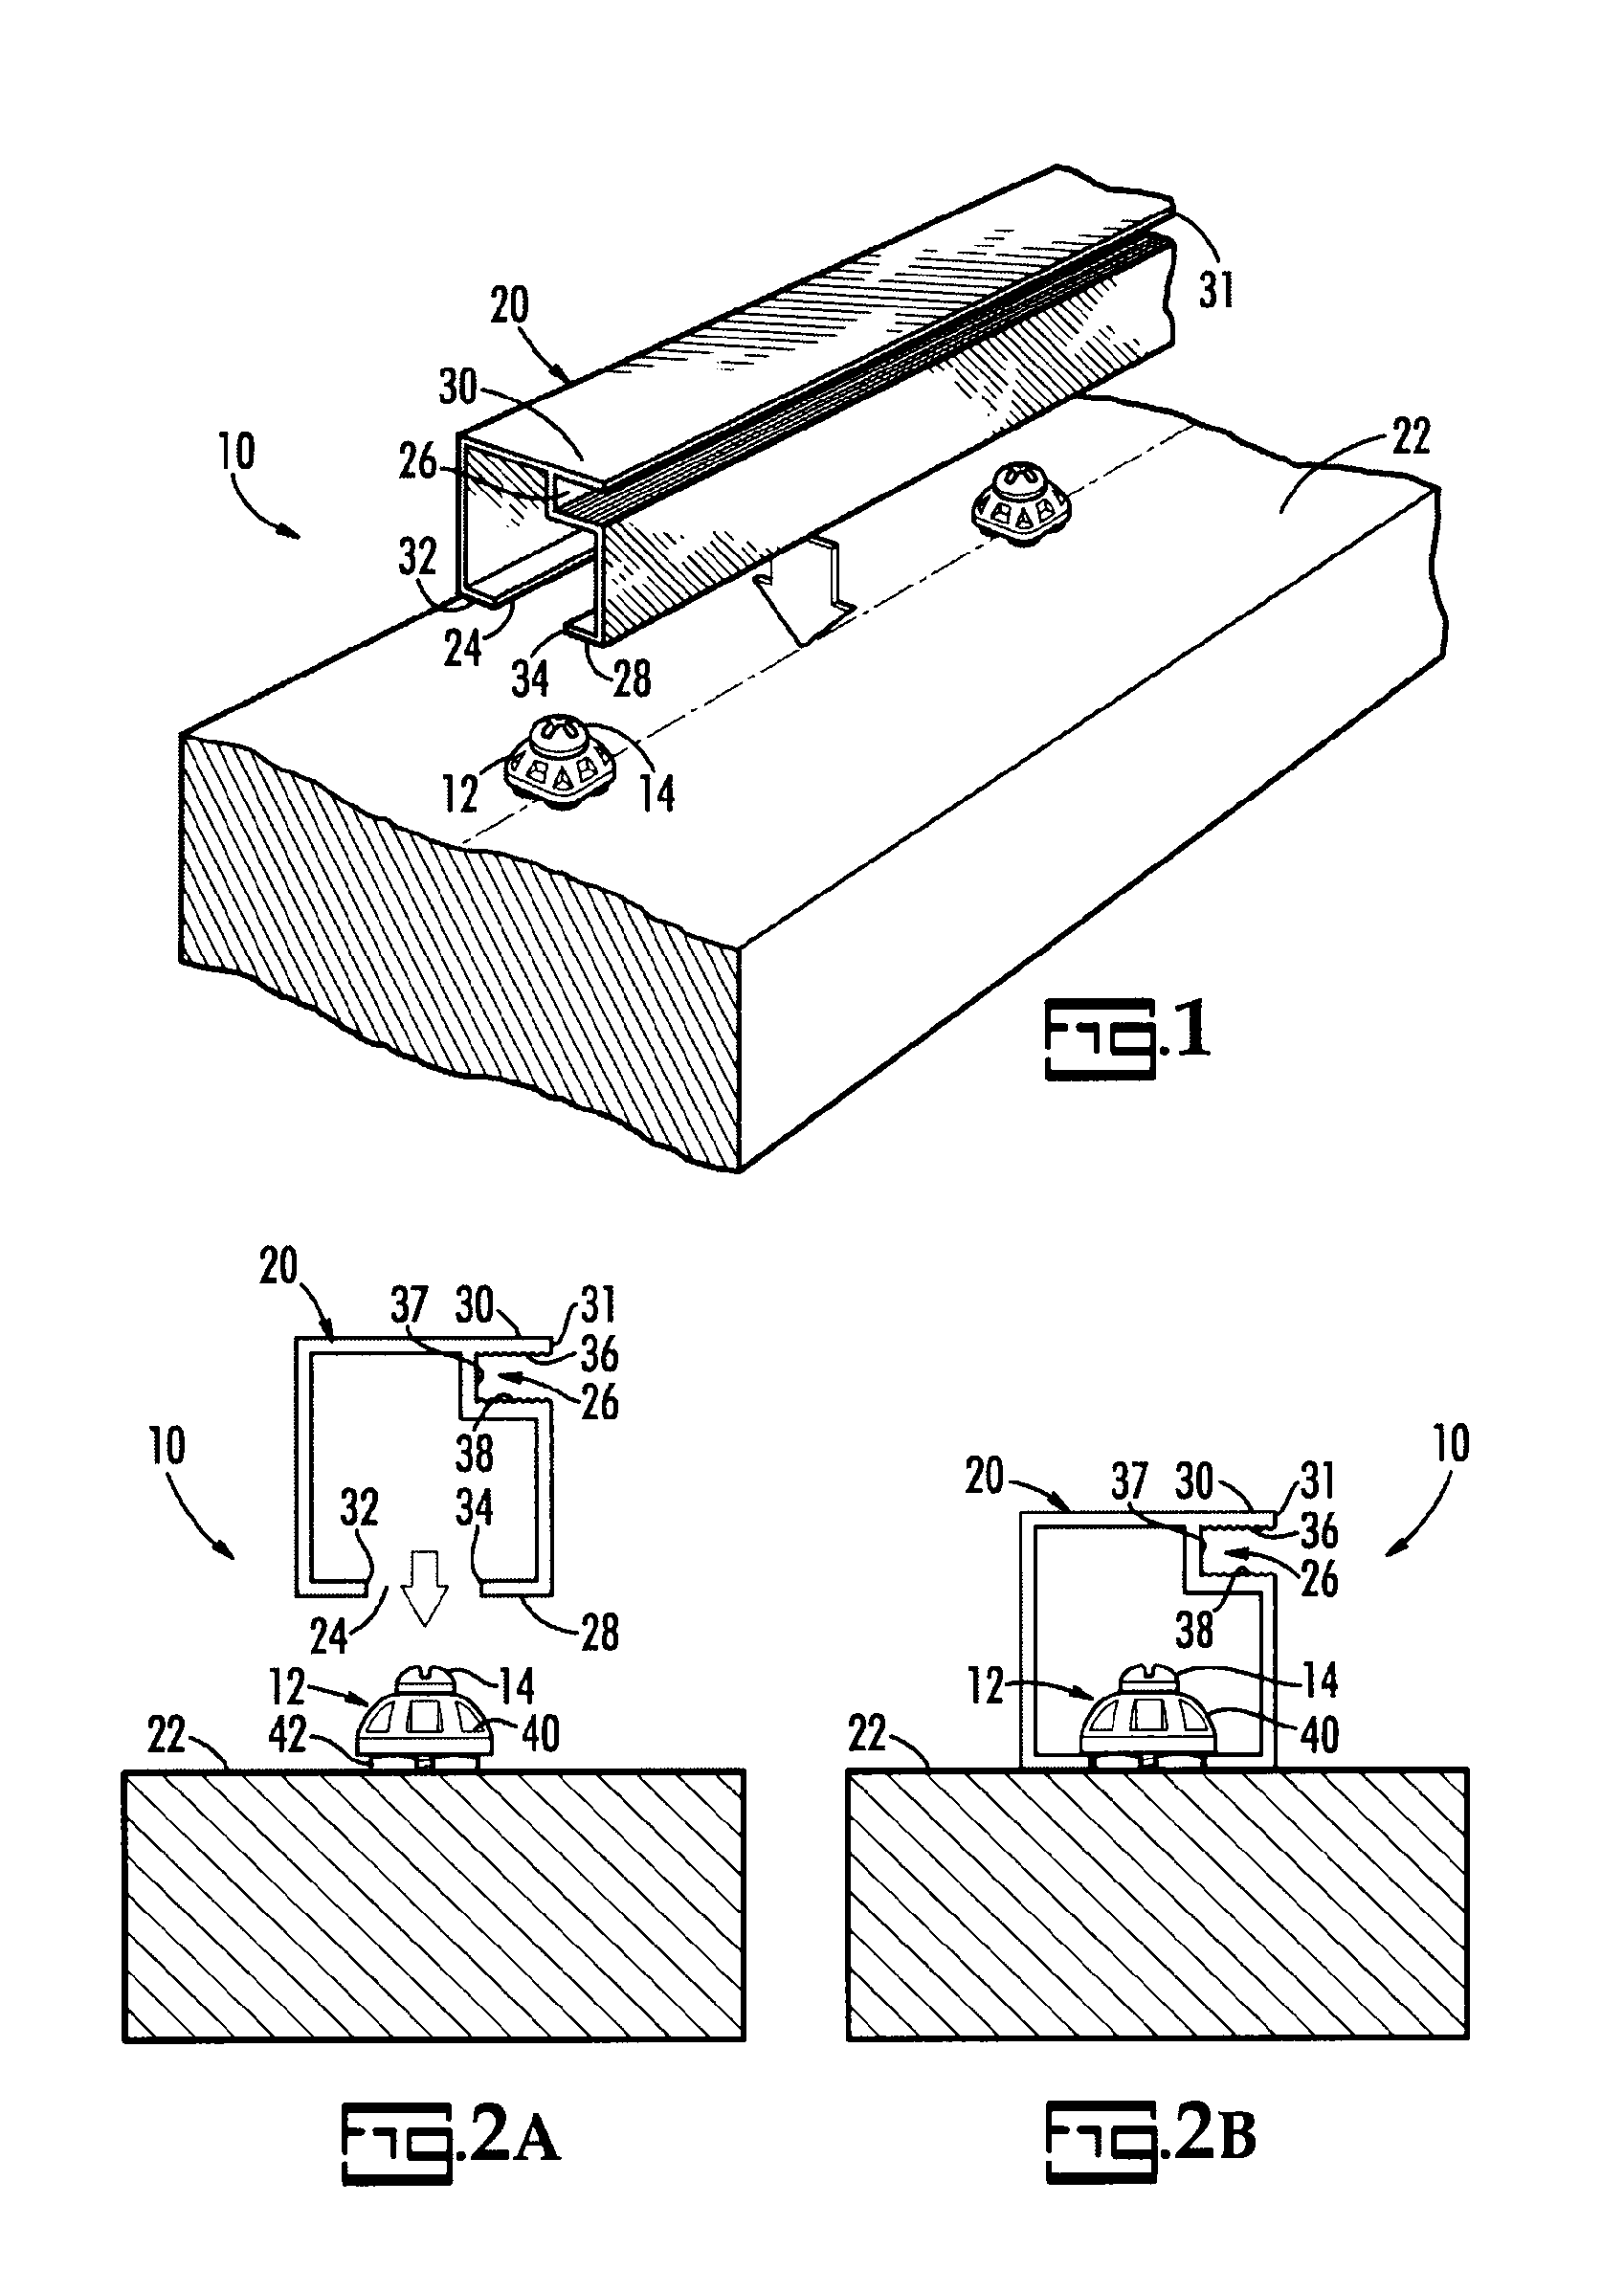 Low-profile screen framing system